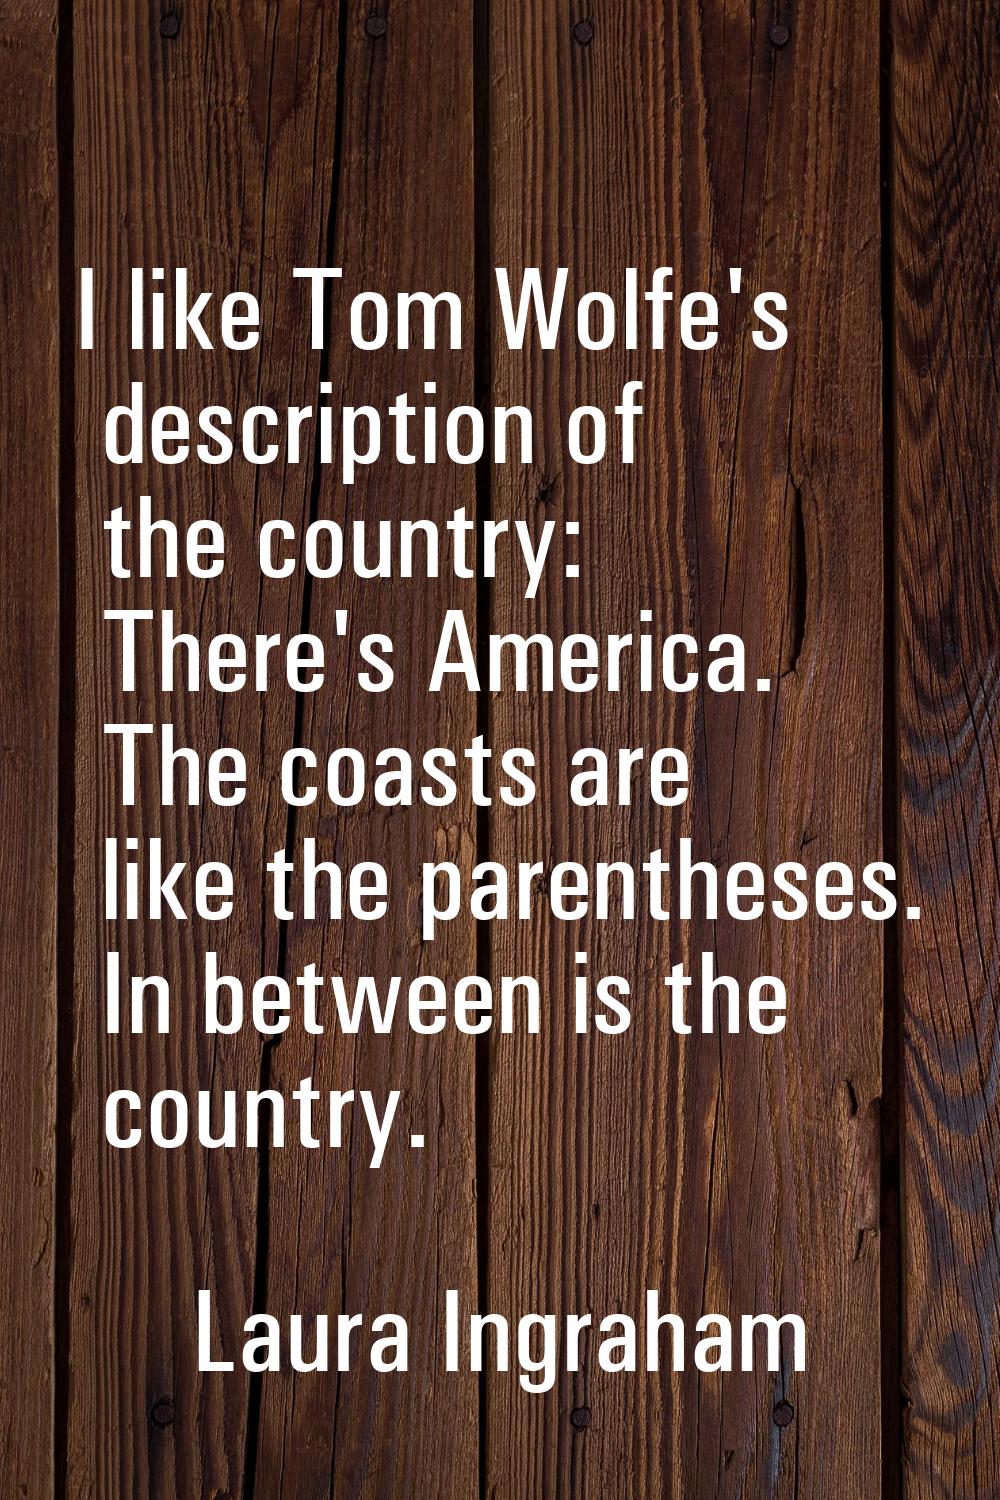 I like Tom Wolfe's description of the country: There's America. The coasts are like the parentheses